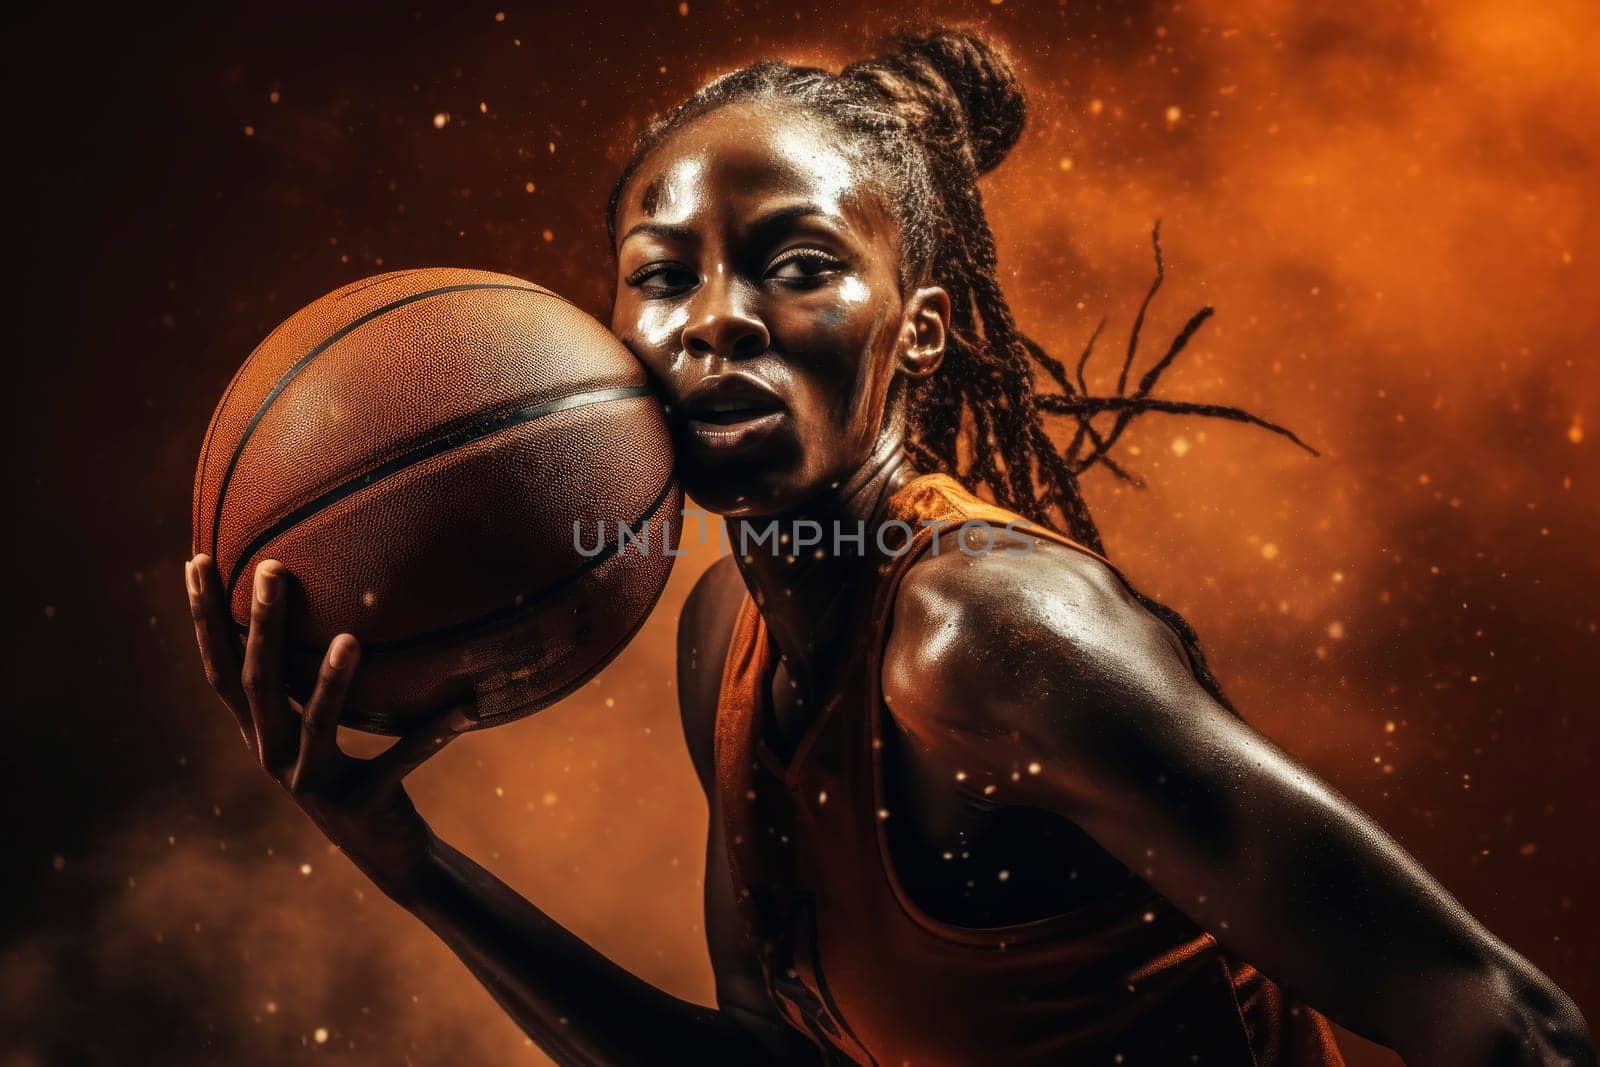 Intense Female Basketball Player in Action by andreyz